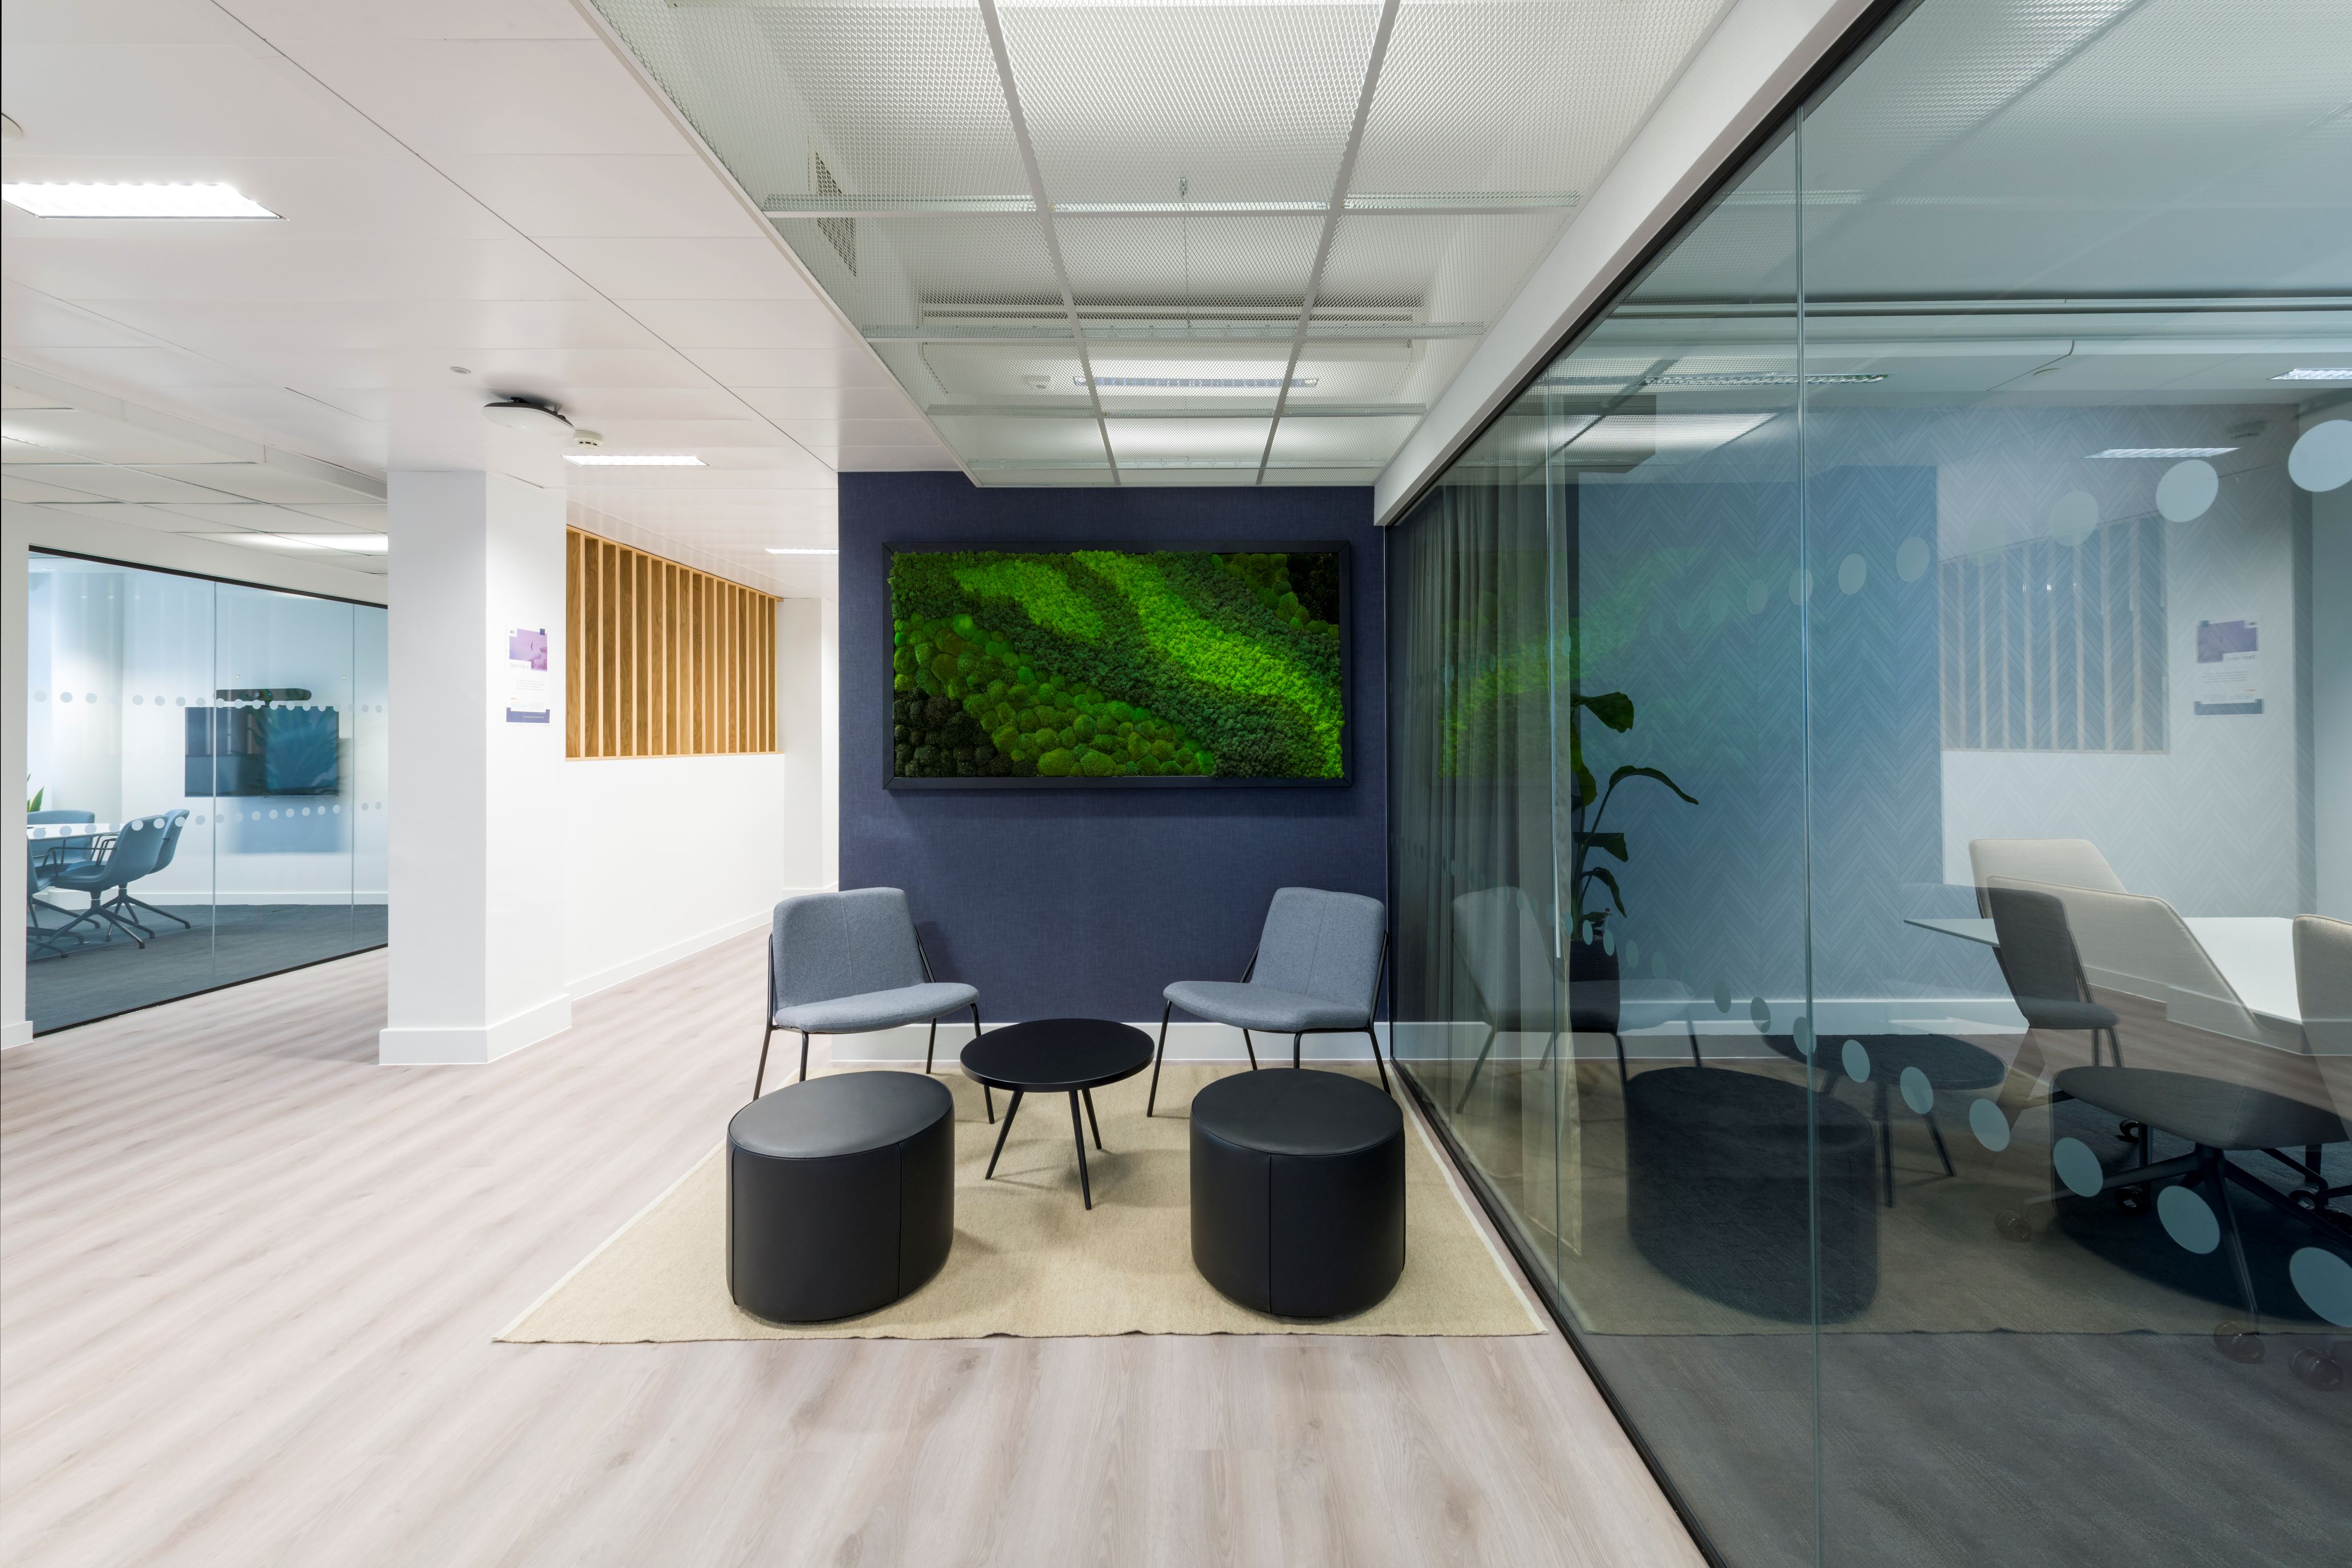 Moss wall and informal meeting space